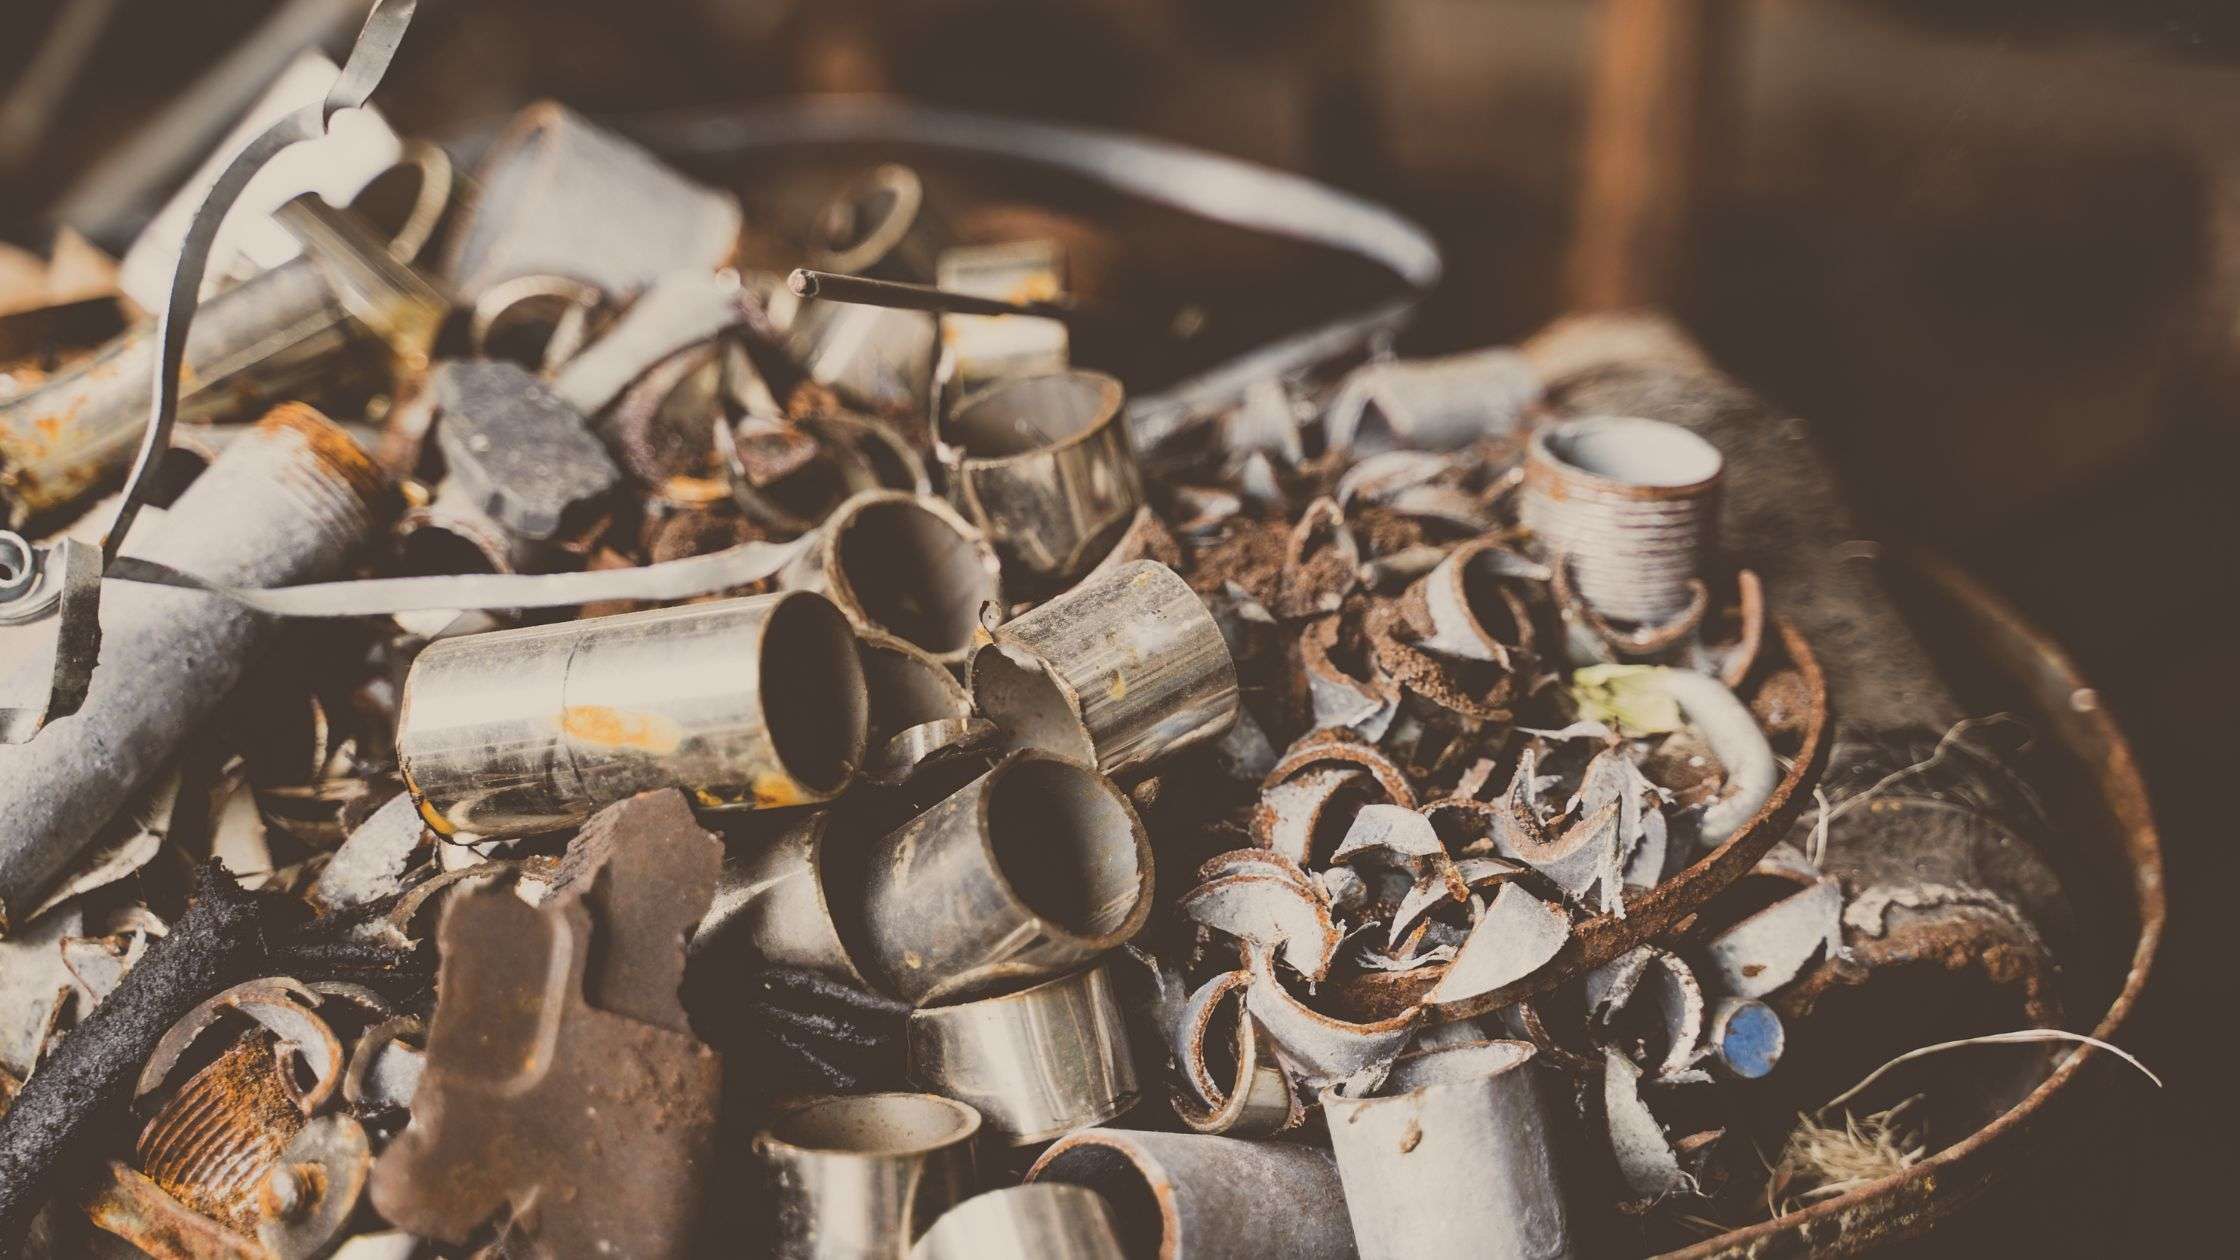 Scrap Metal Pick Up: What Can You Recycle?